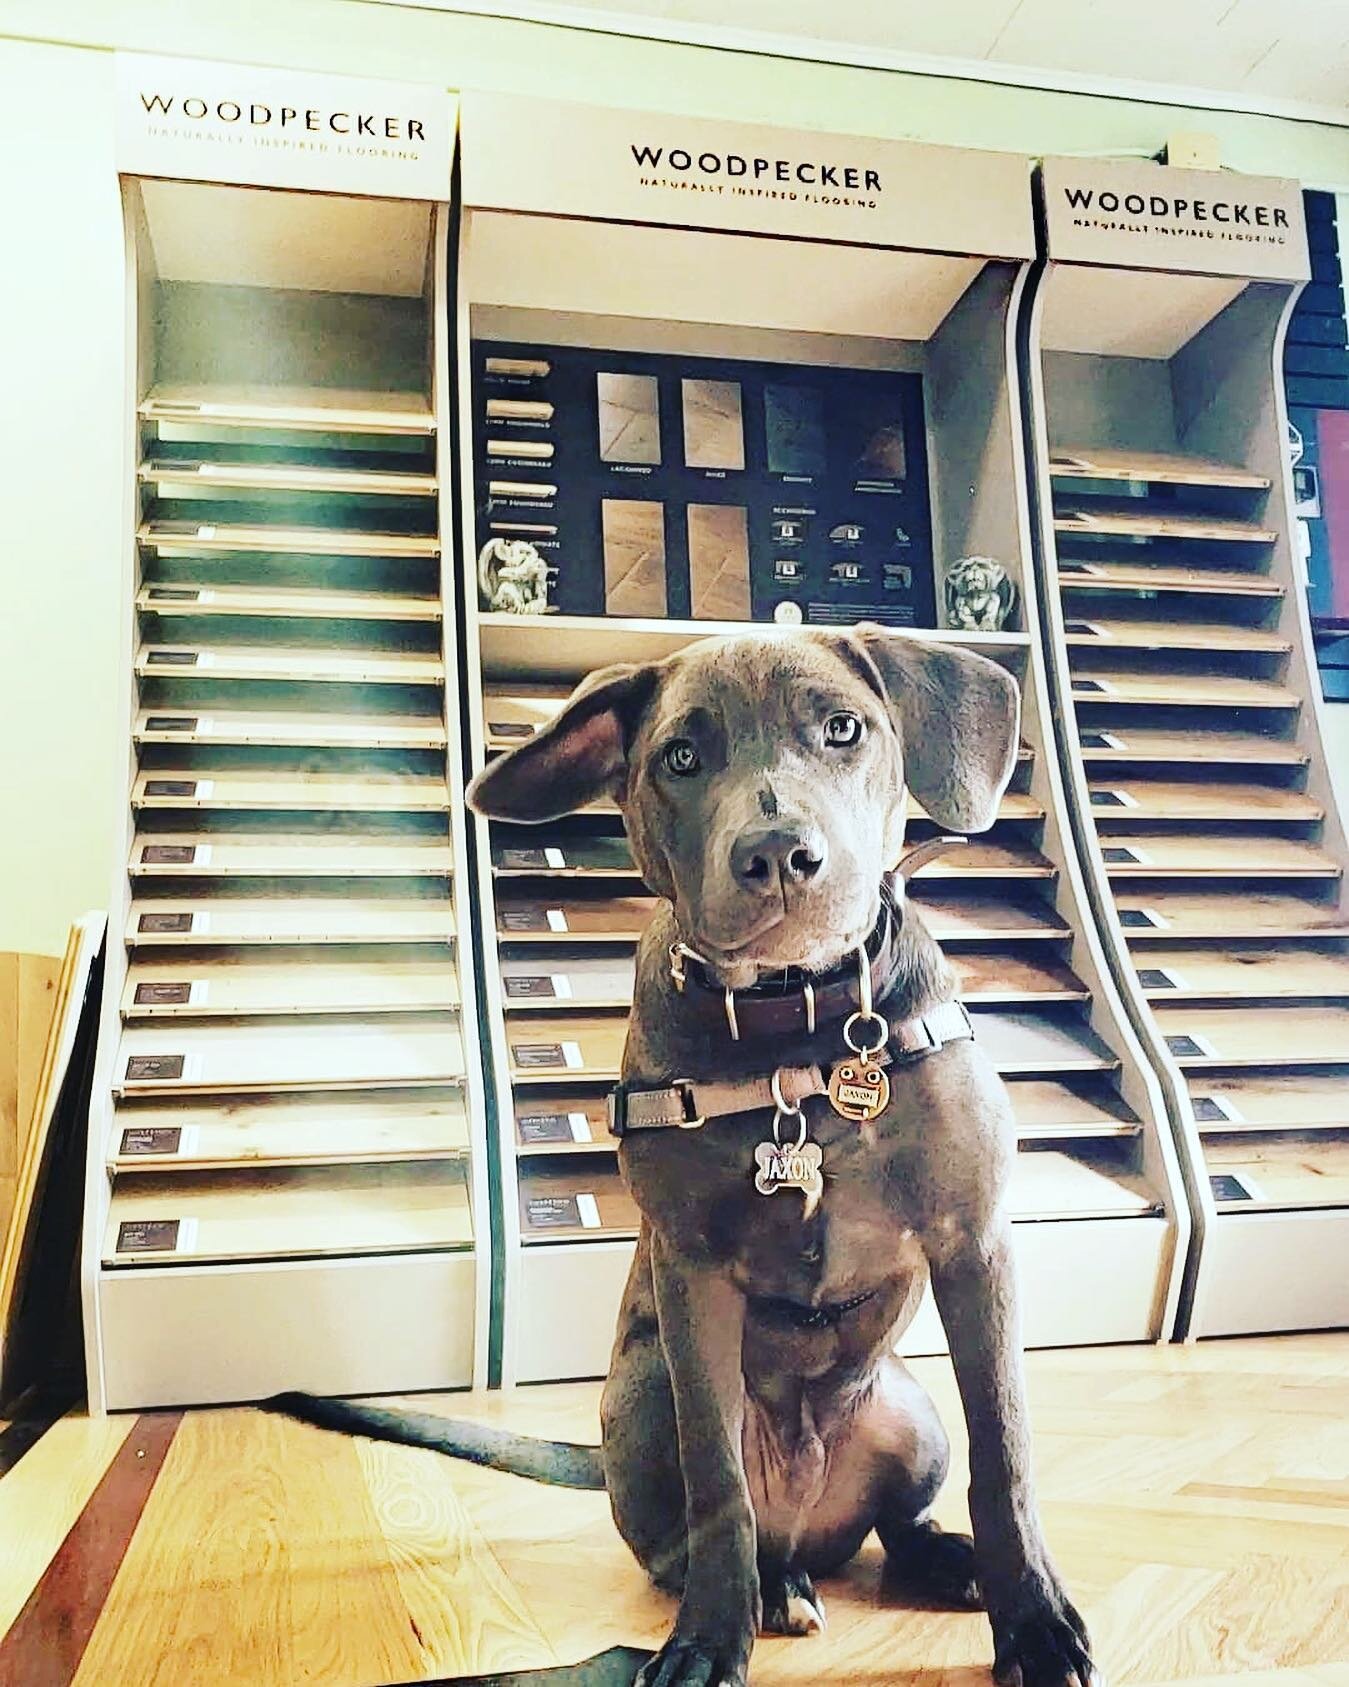 Meet Jaxon!!! The showroom guardian. And behind Jax we have a beautiful @wearewoodpecker @woodpeckerflooringus  wood flooring display @lorinemtage .  Come and visit us at 539 Broad st Central Falls RI. Call 401-4990037 to make an appointment. Or visi